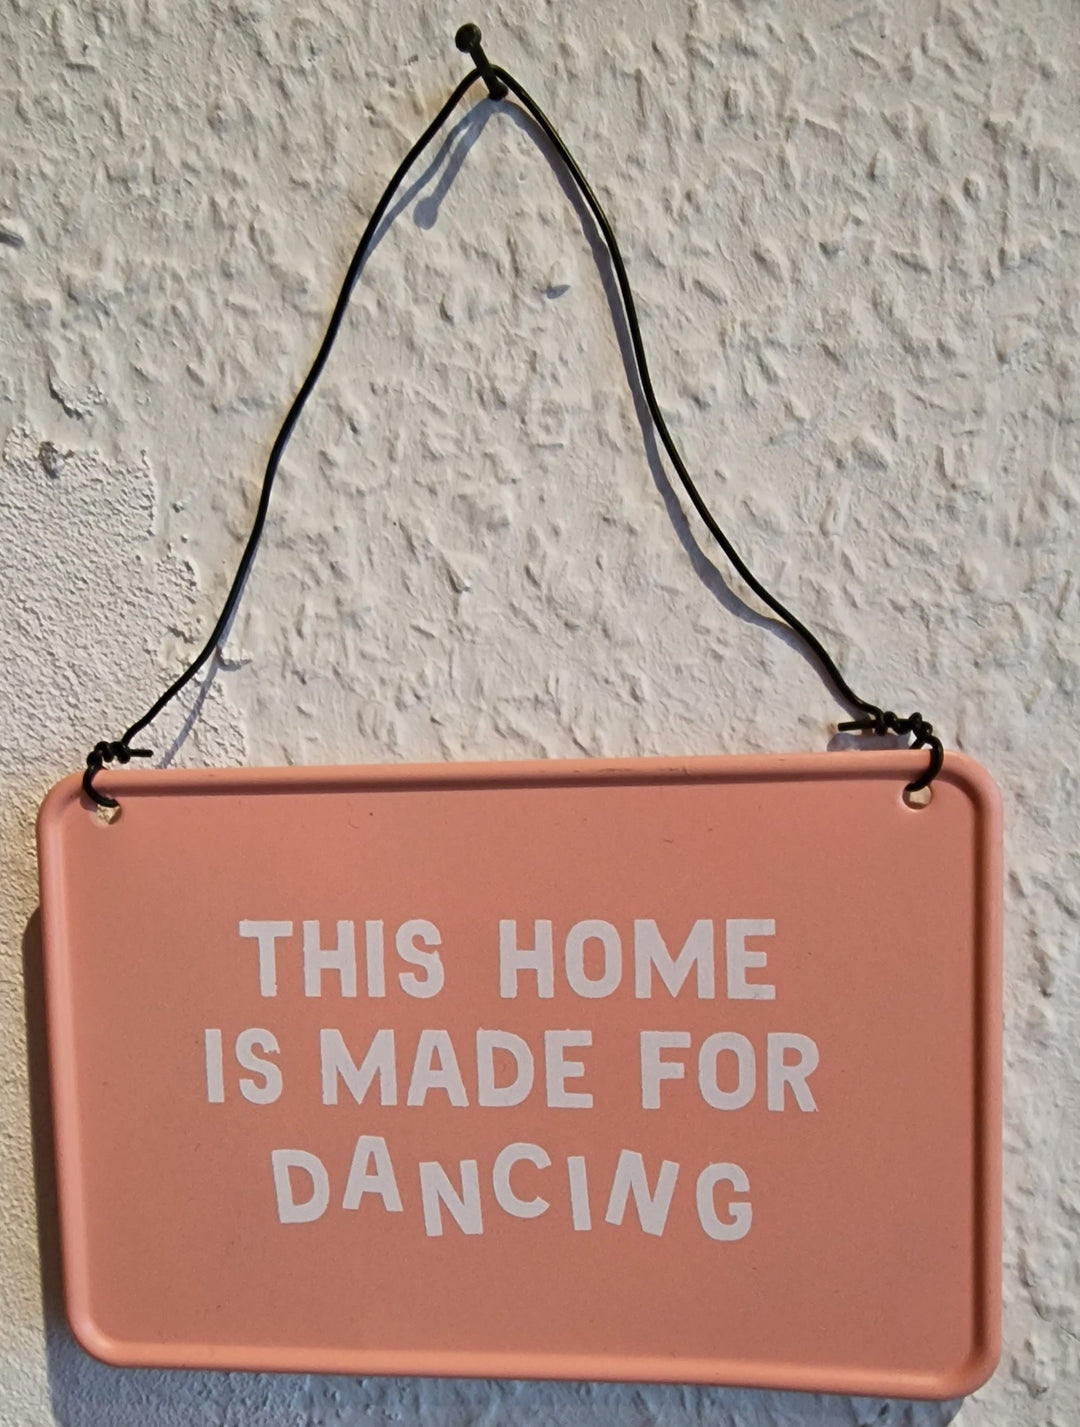 This home is made for dancing"